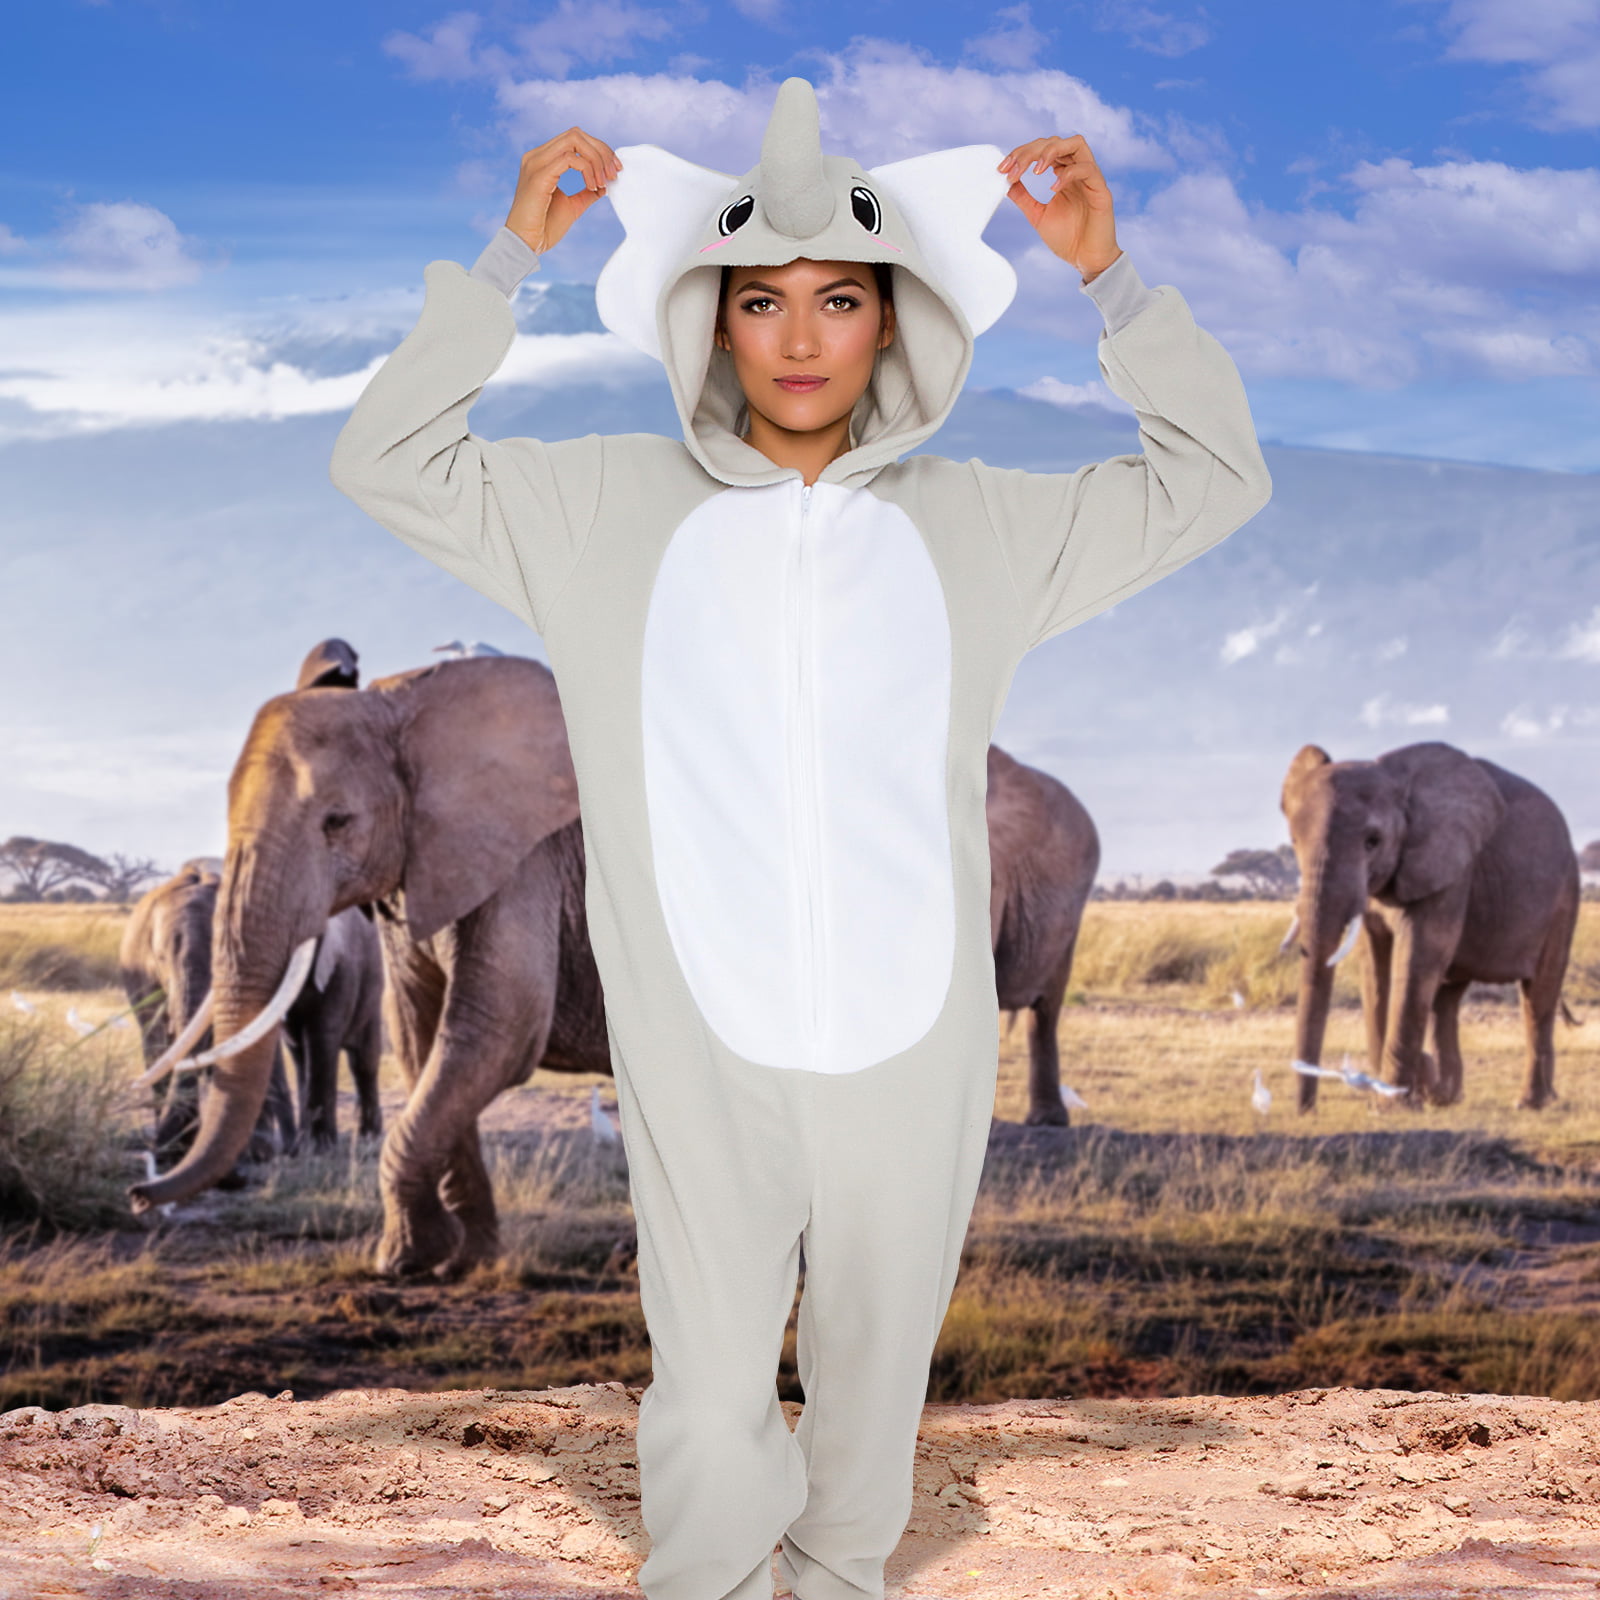 Slim Fit Animal Pajamas Adult One Piece Cosplay Elephant Costume by Silver Lilly 